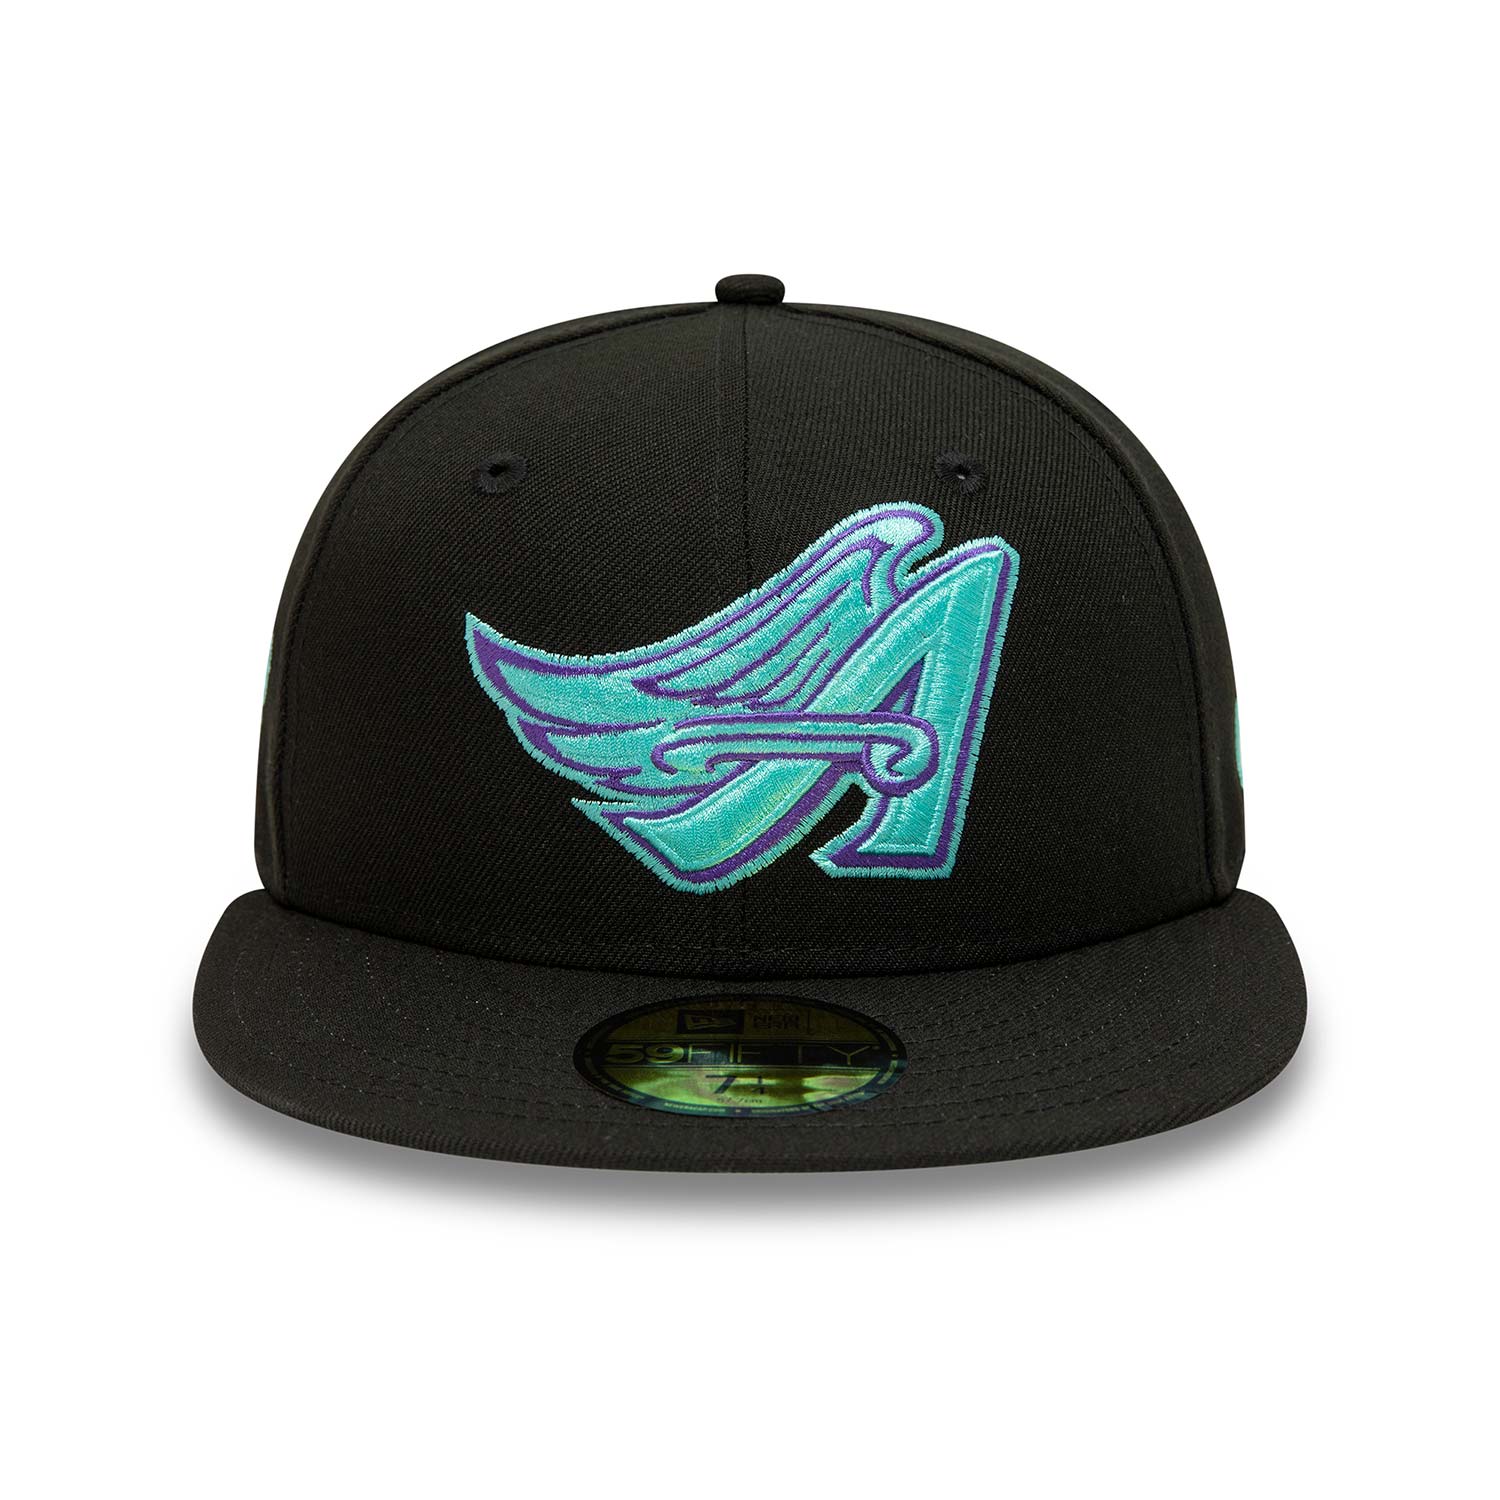 Cappellino 59FIFTY Fitted Anahiem Angels Tint Nero e azzurro